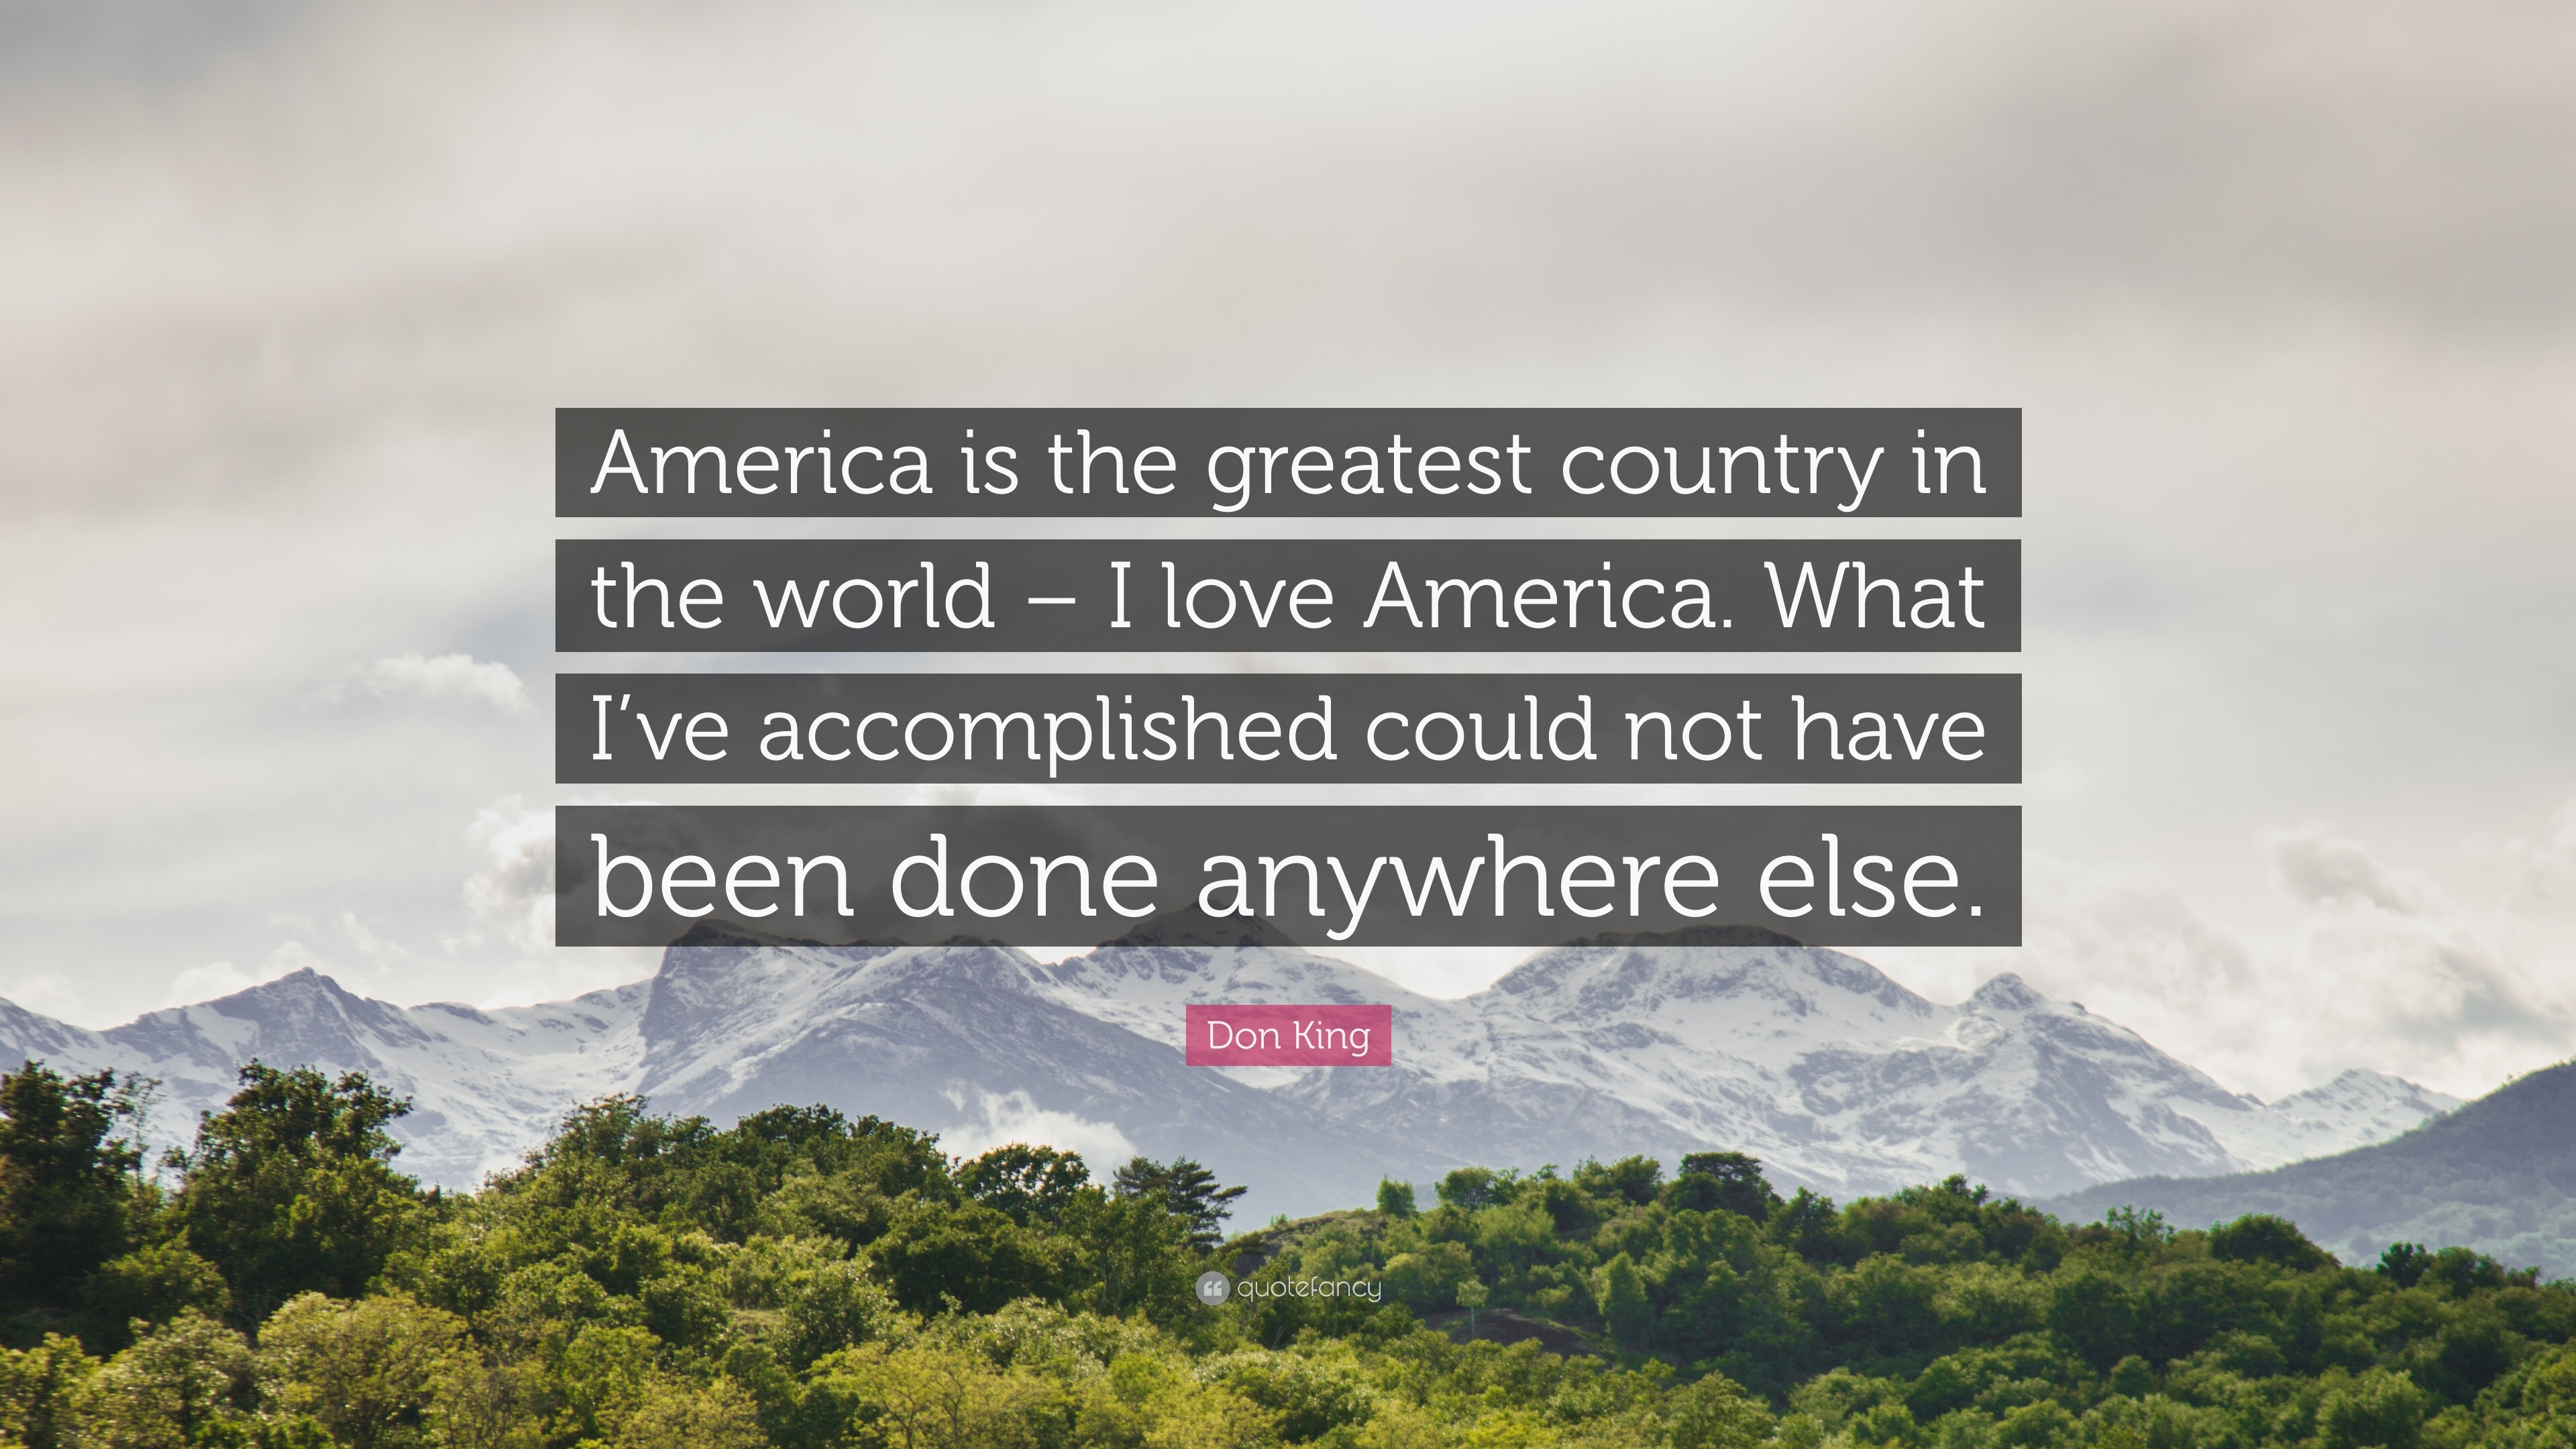 Don King Quote: “America is the greatest country in the world – I love  America. What I've accomplished could not have been done anywhere ”